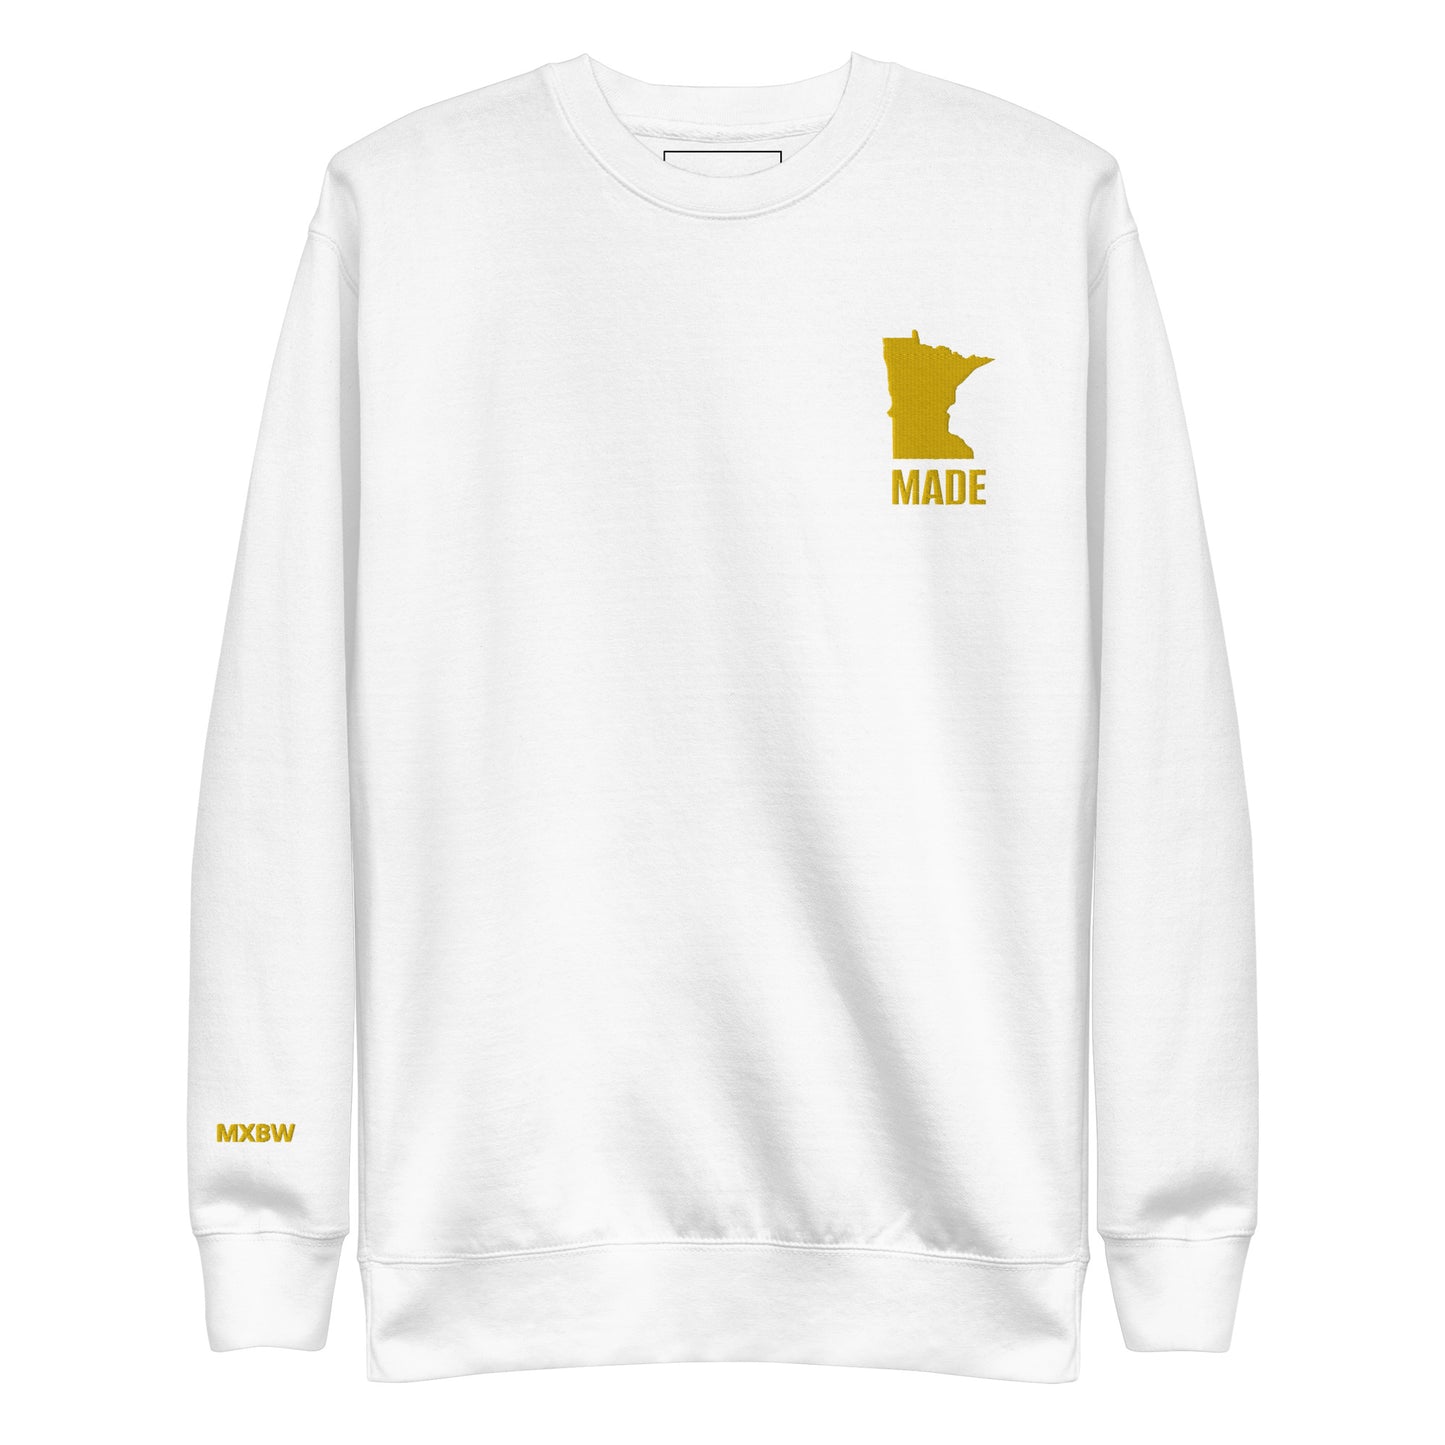 ✪ UNISEX | MINNESOTA MADE | FITTED ESSENTIAL EMBROIDERED PULLOVER SWEATSHIRT